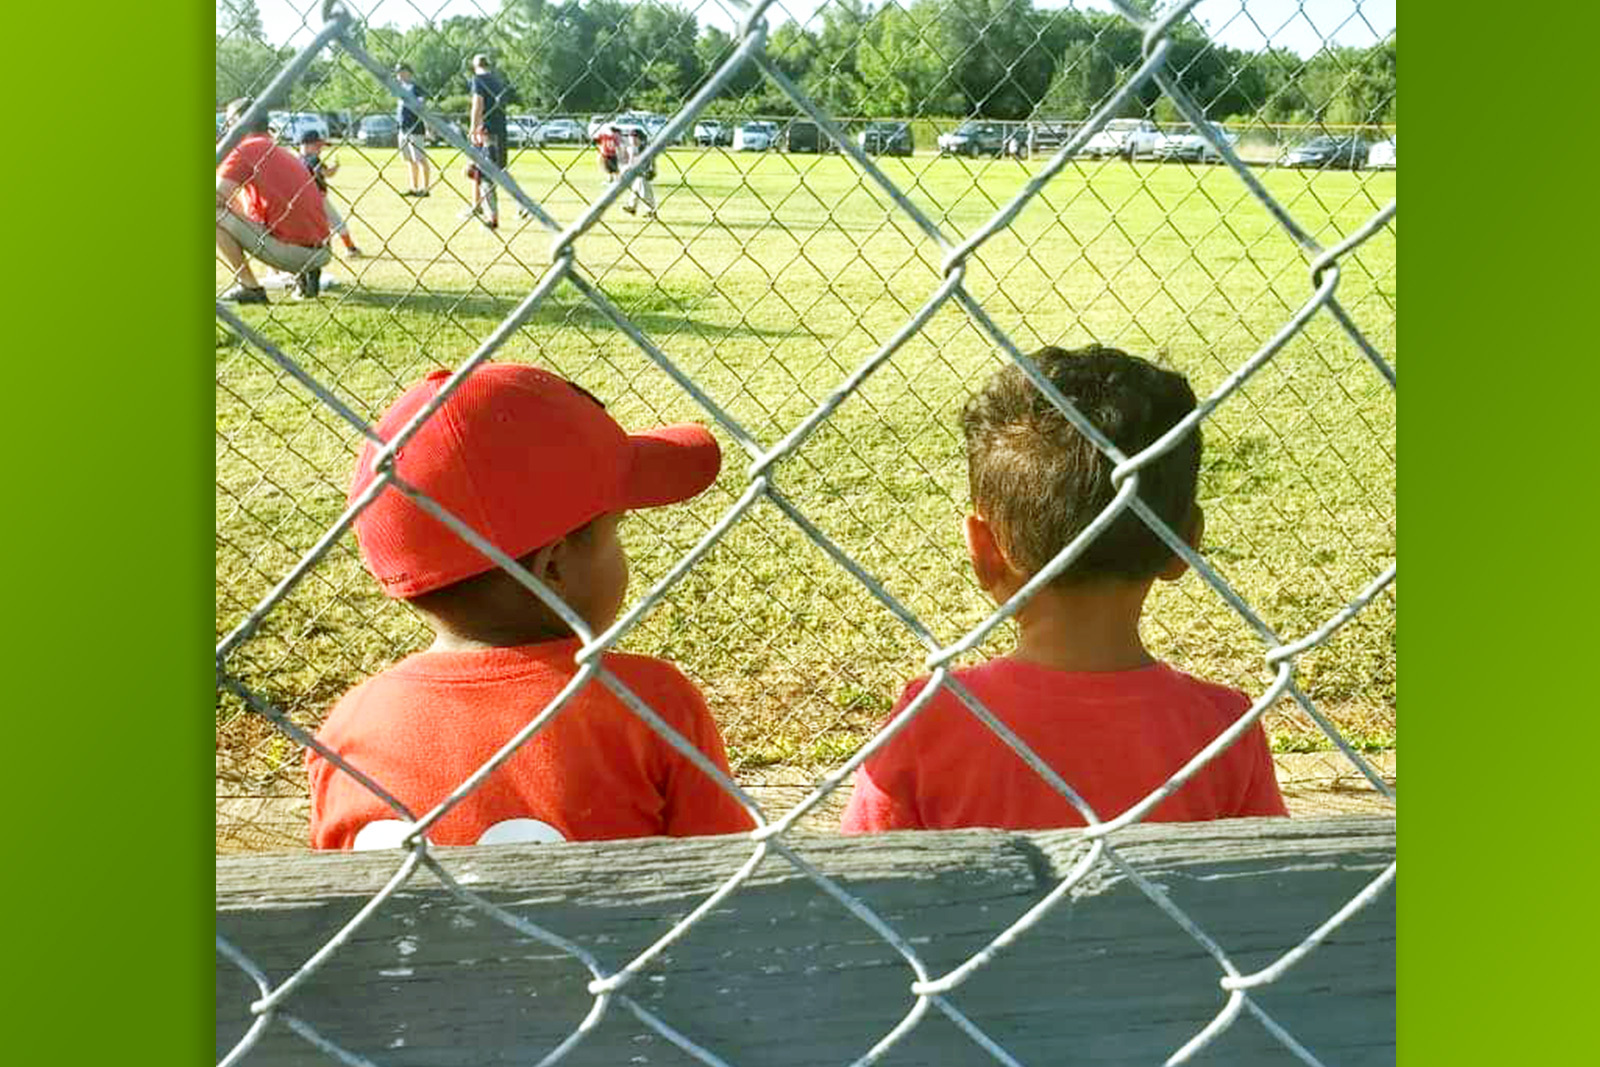 photo of two brothers at baseball game